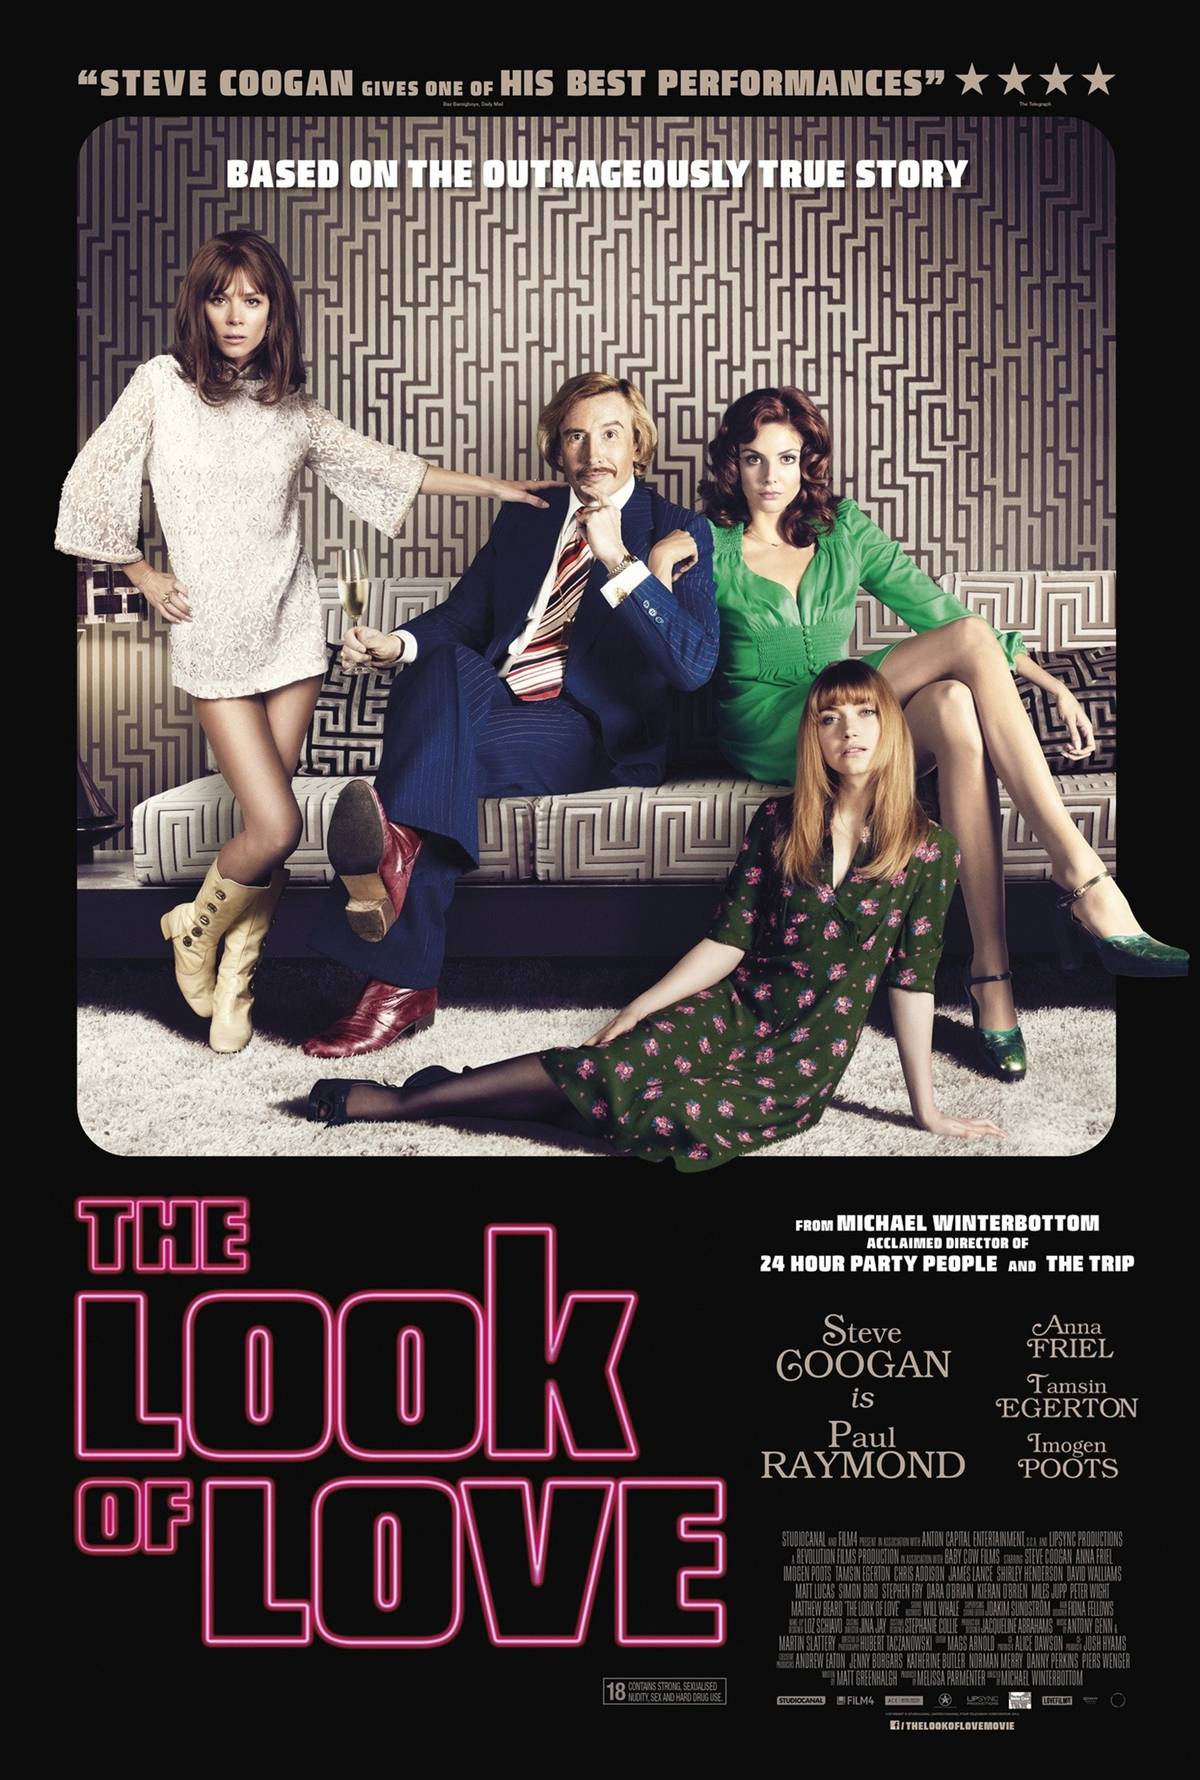 THE LOOK OF LOVE Poster 02